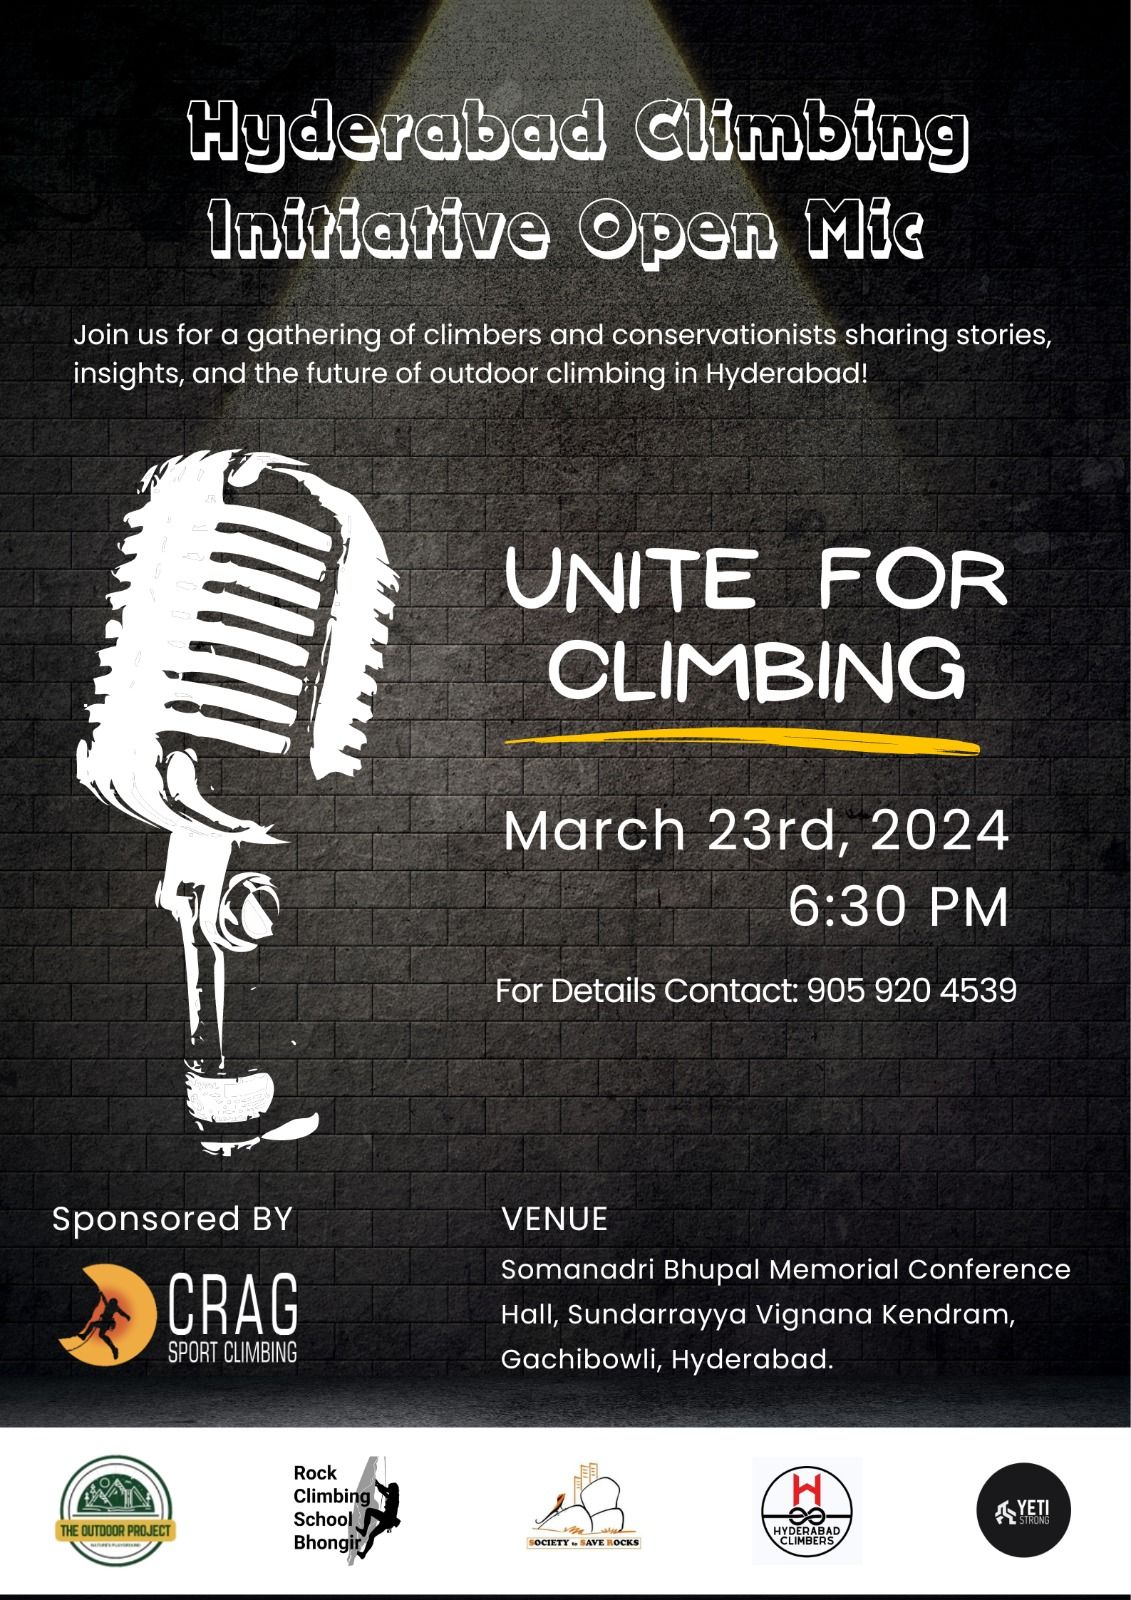 Hyderabad Climbing Initiative OpenMic March 23, 6:30 PM